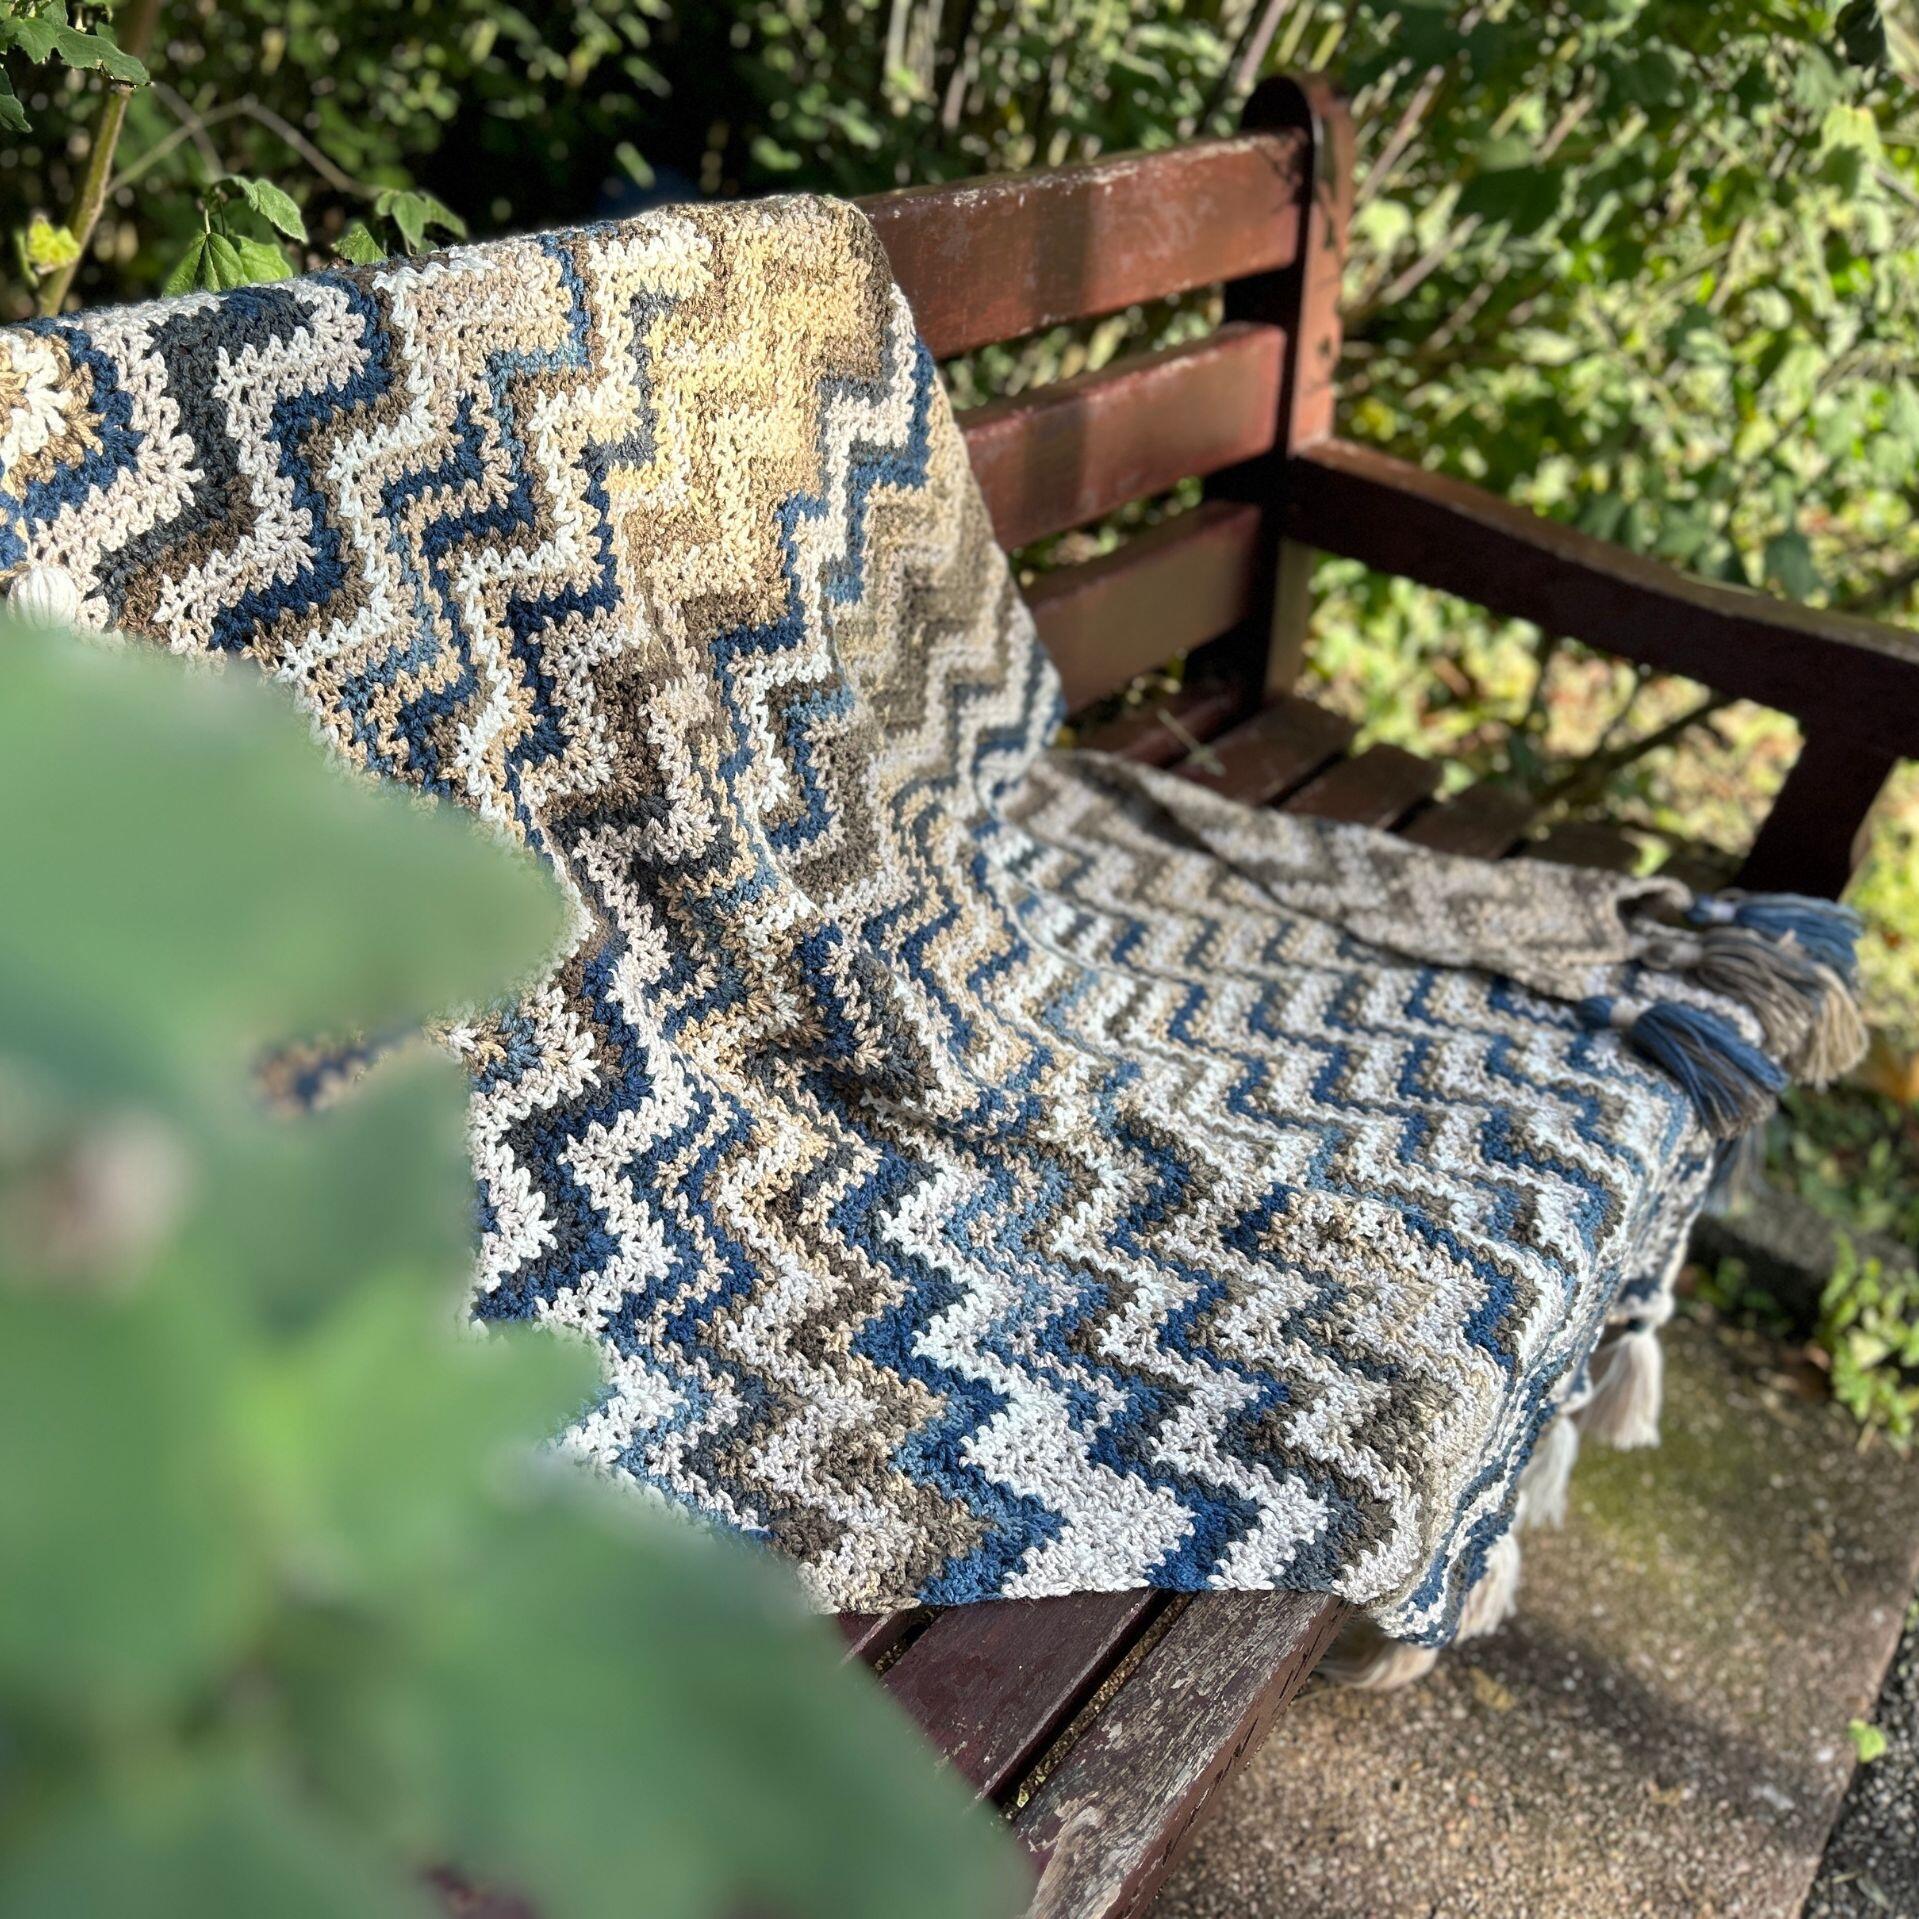 The winter solace blanket laid out on a bench in a park